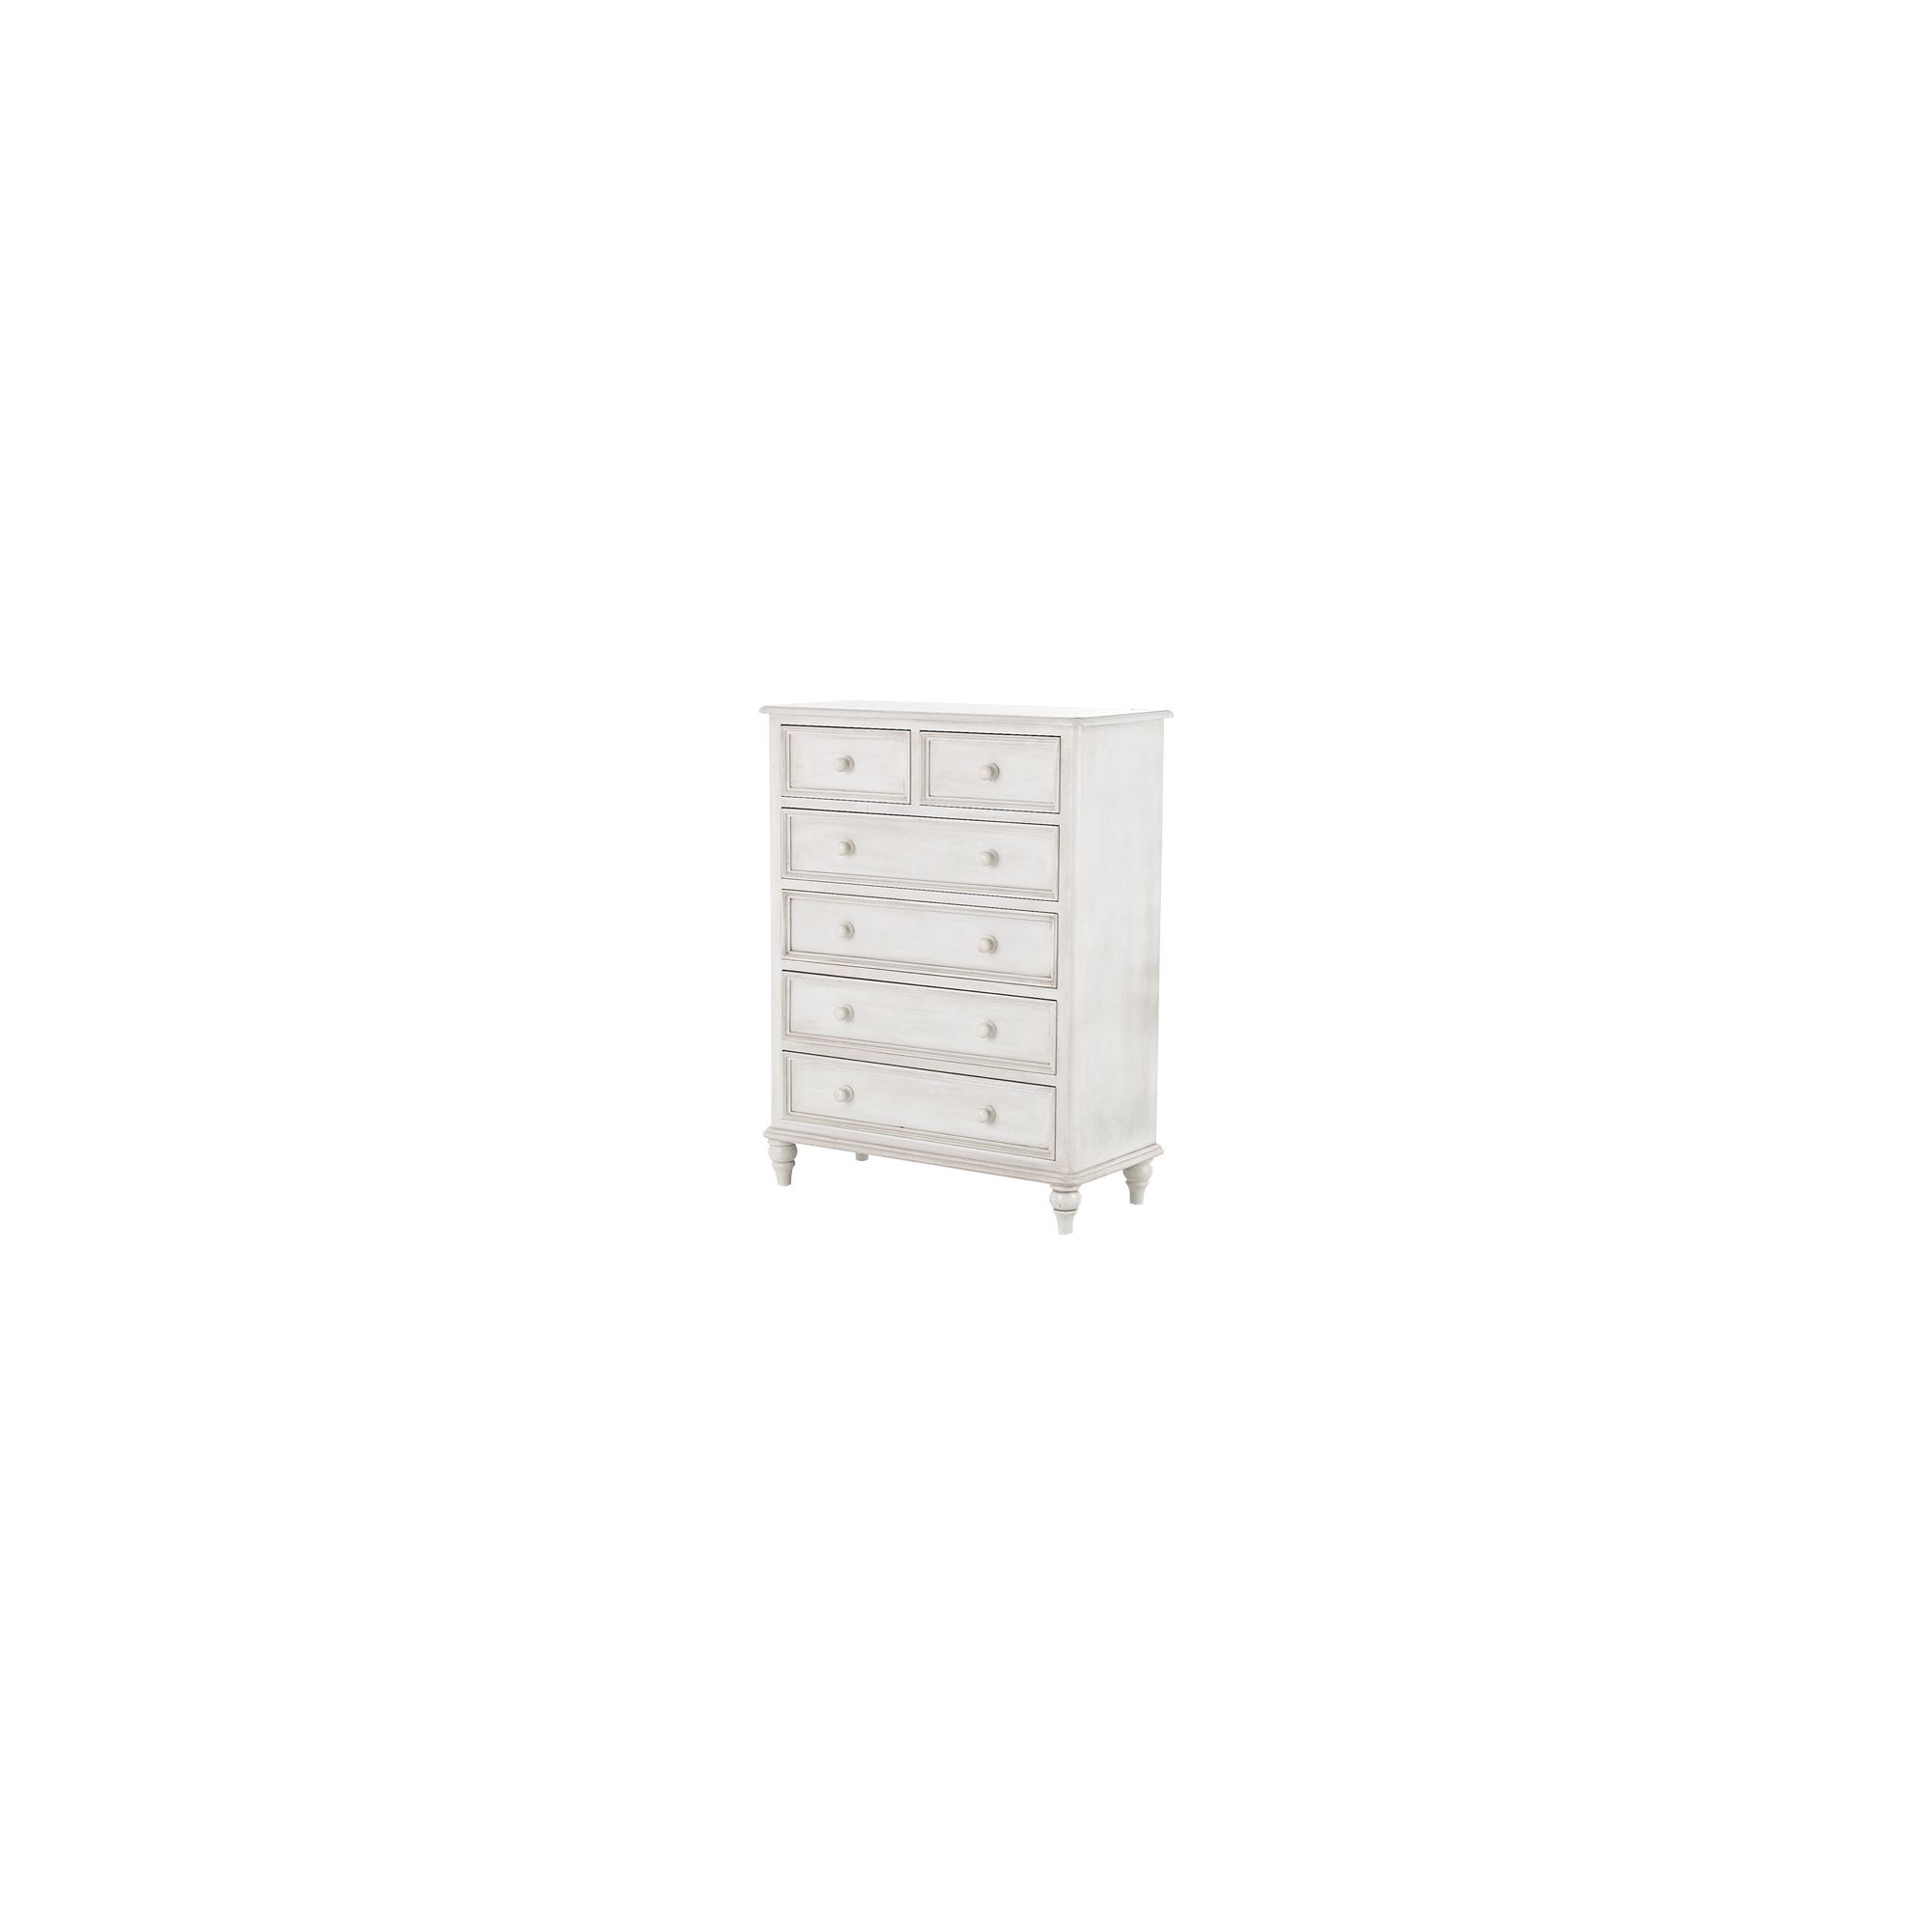 Thorndon Brittany 2 Over 4 Jumbo Drawer Chest in Antique White at Tesco Direct